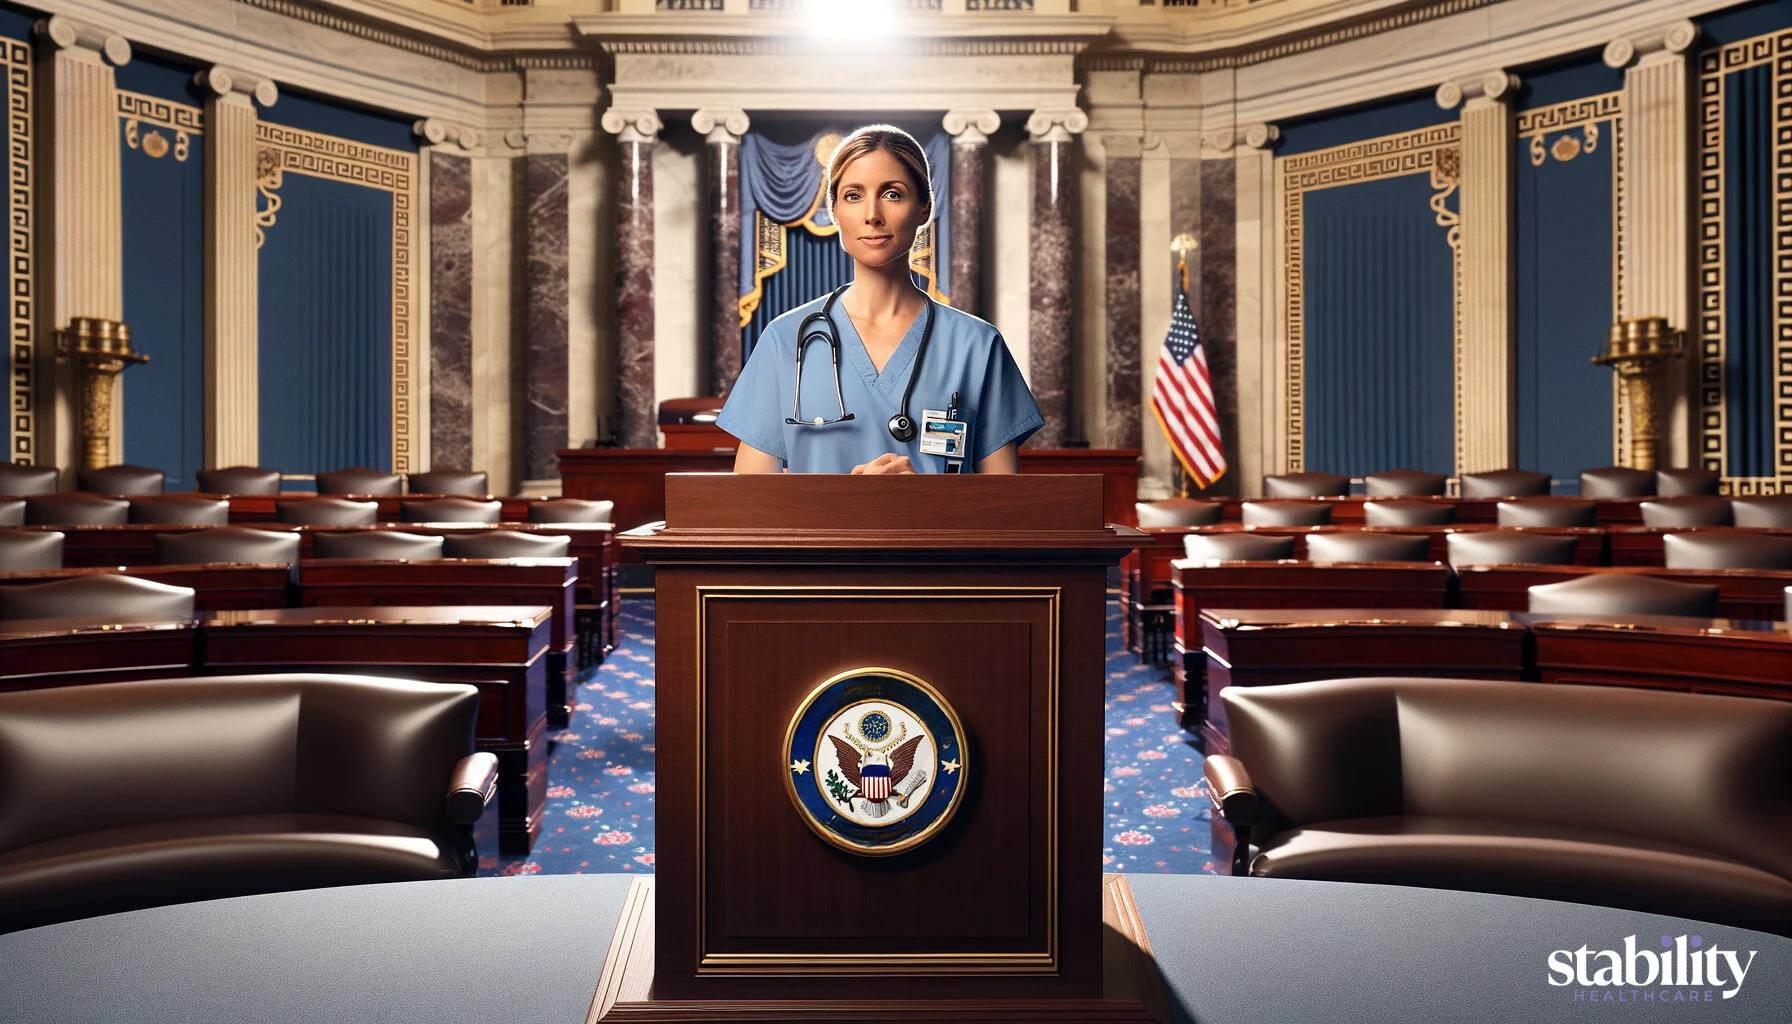 Nurse is standing at a podium in a political setting like a the Senate or House of Representatives.